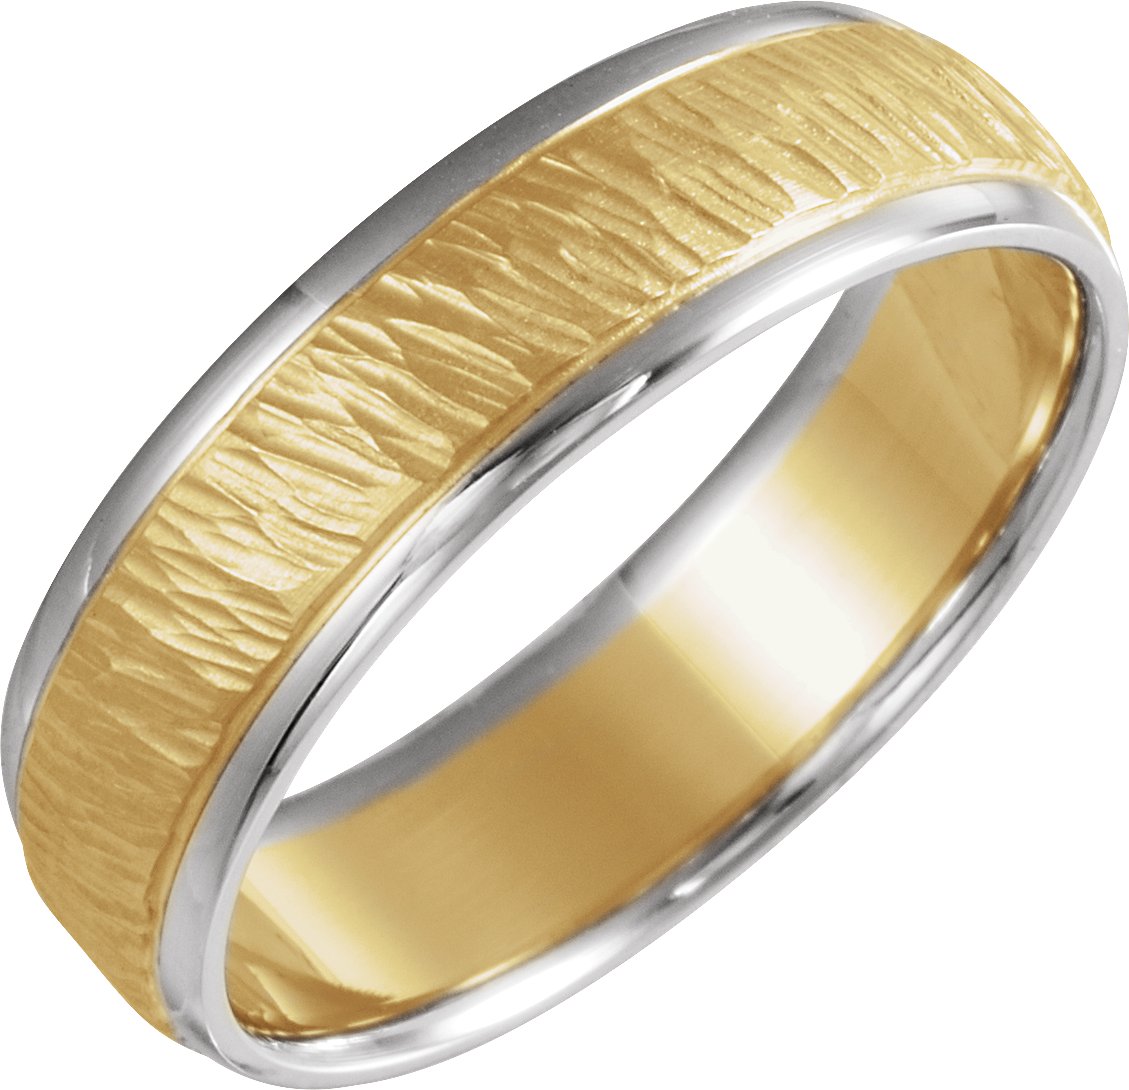 14K Yellow White 6 mm Design Engraved Band Size 10.5 Ref 15320011